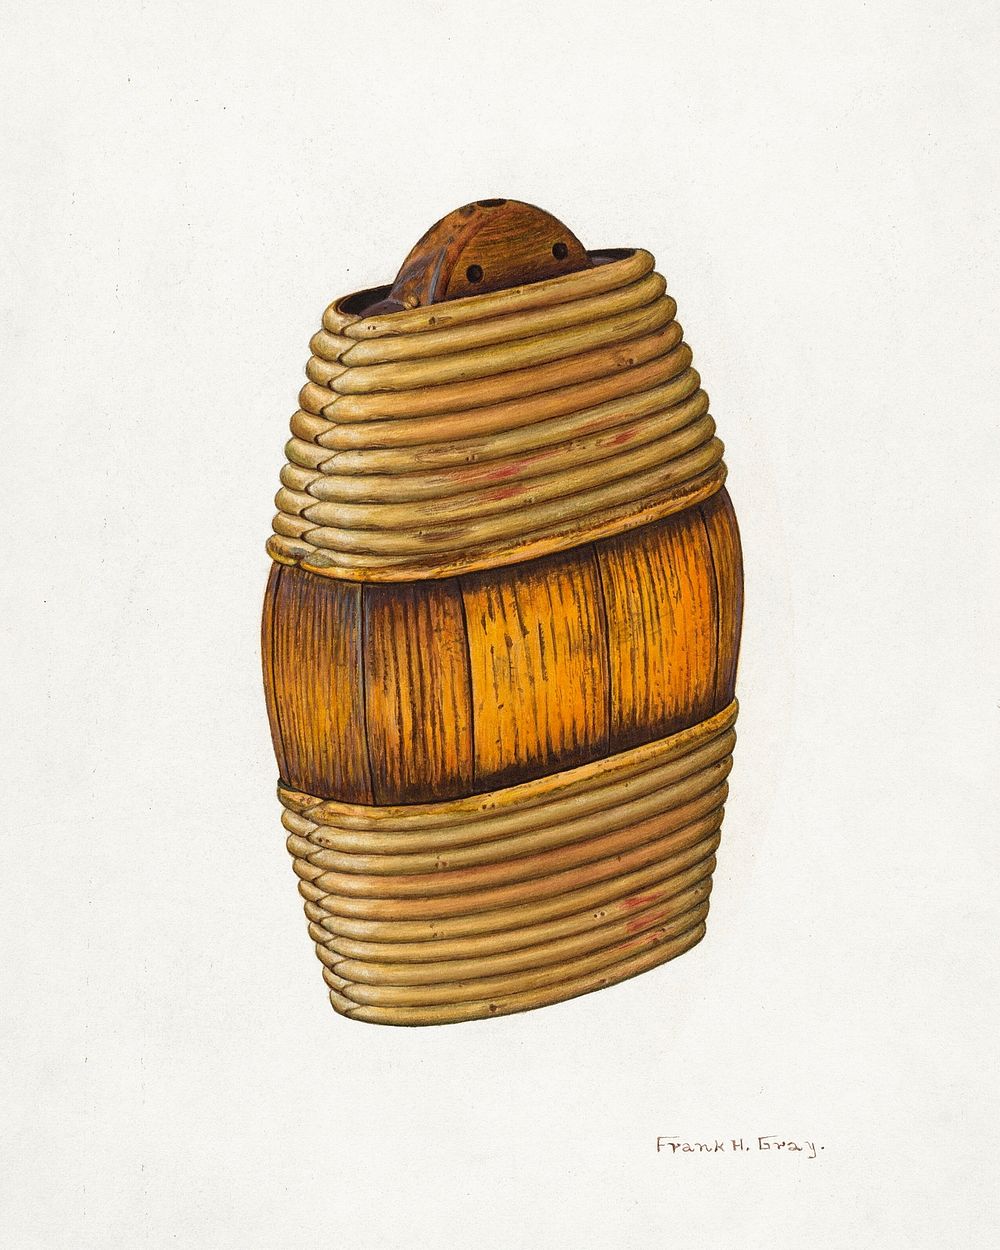 Willow-Bound Flask (ca.1940) by Frank Gray. Original from The National Gallery of Art. Digitally enhanced by rawpixel.